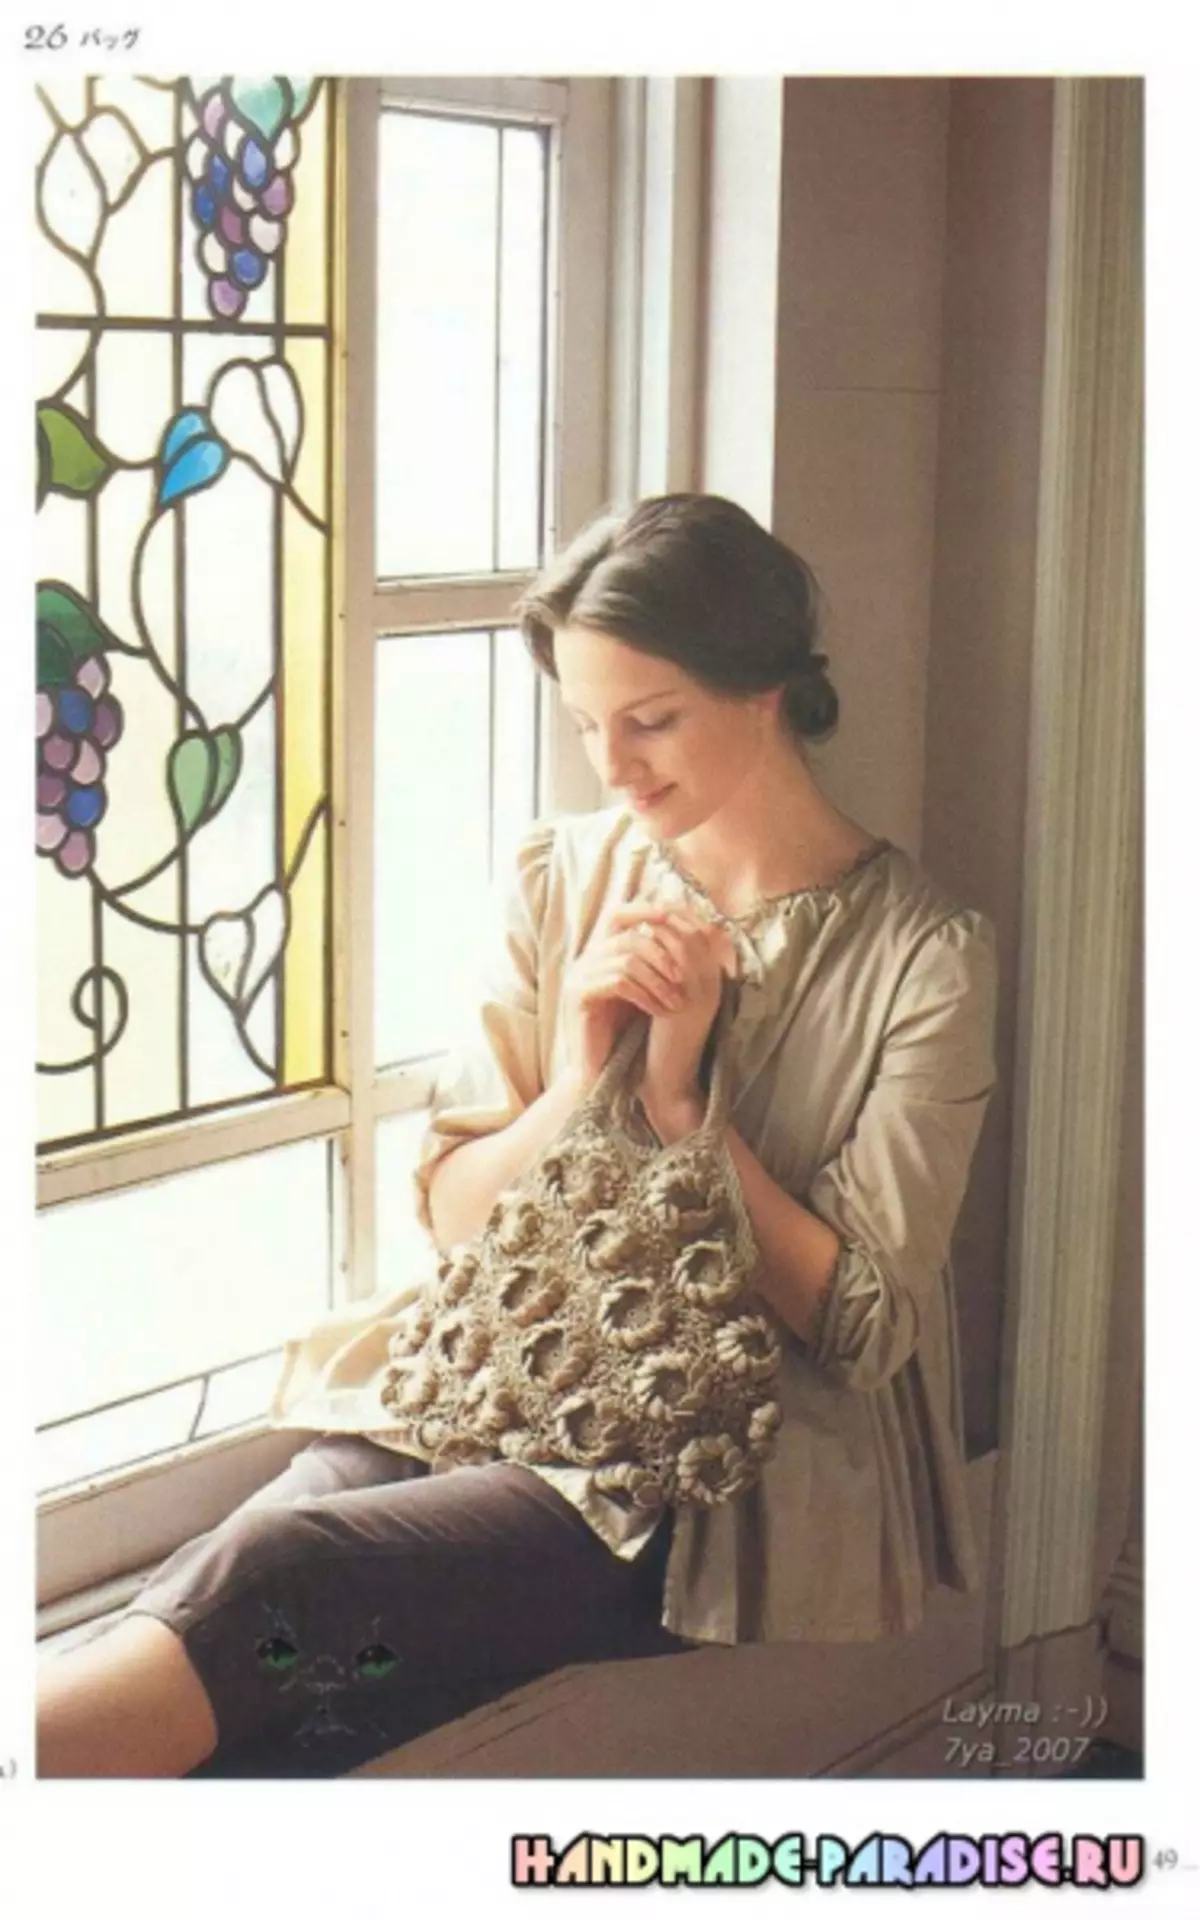 Irish lace. Knitting bags and accessories